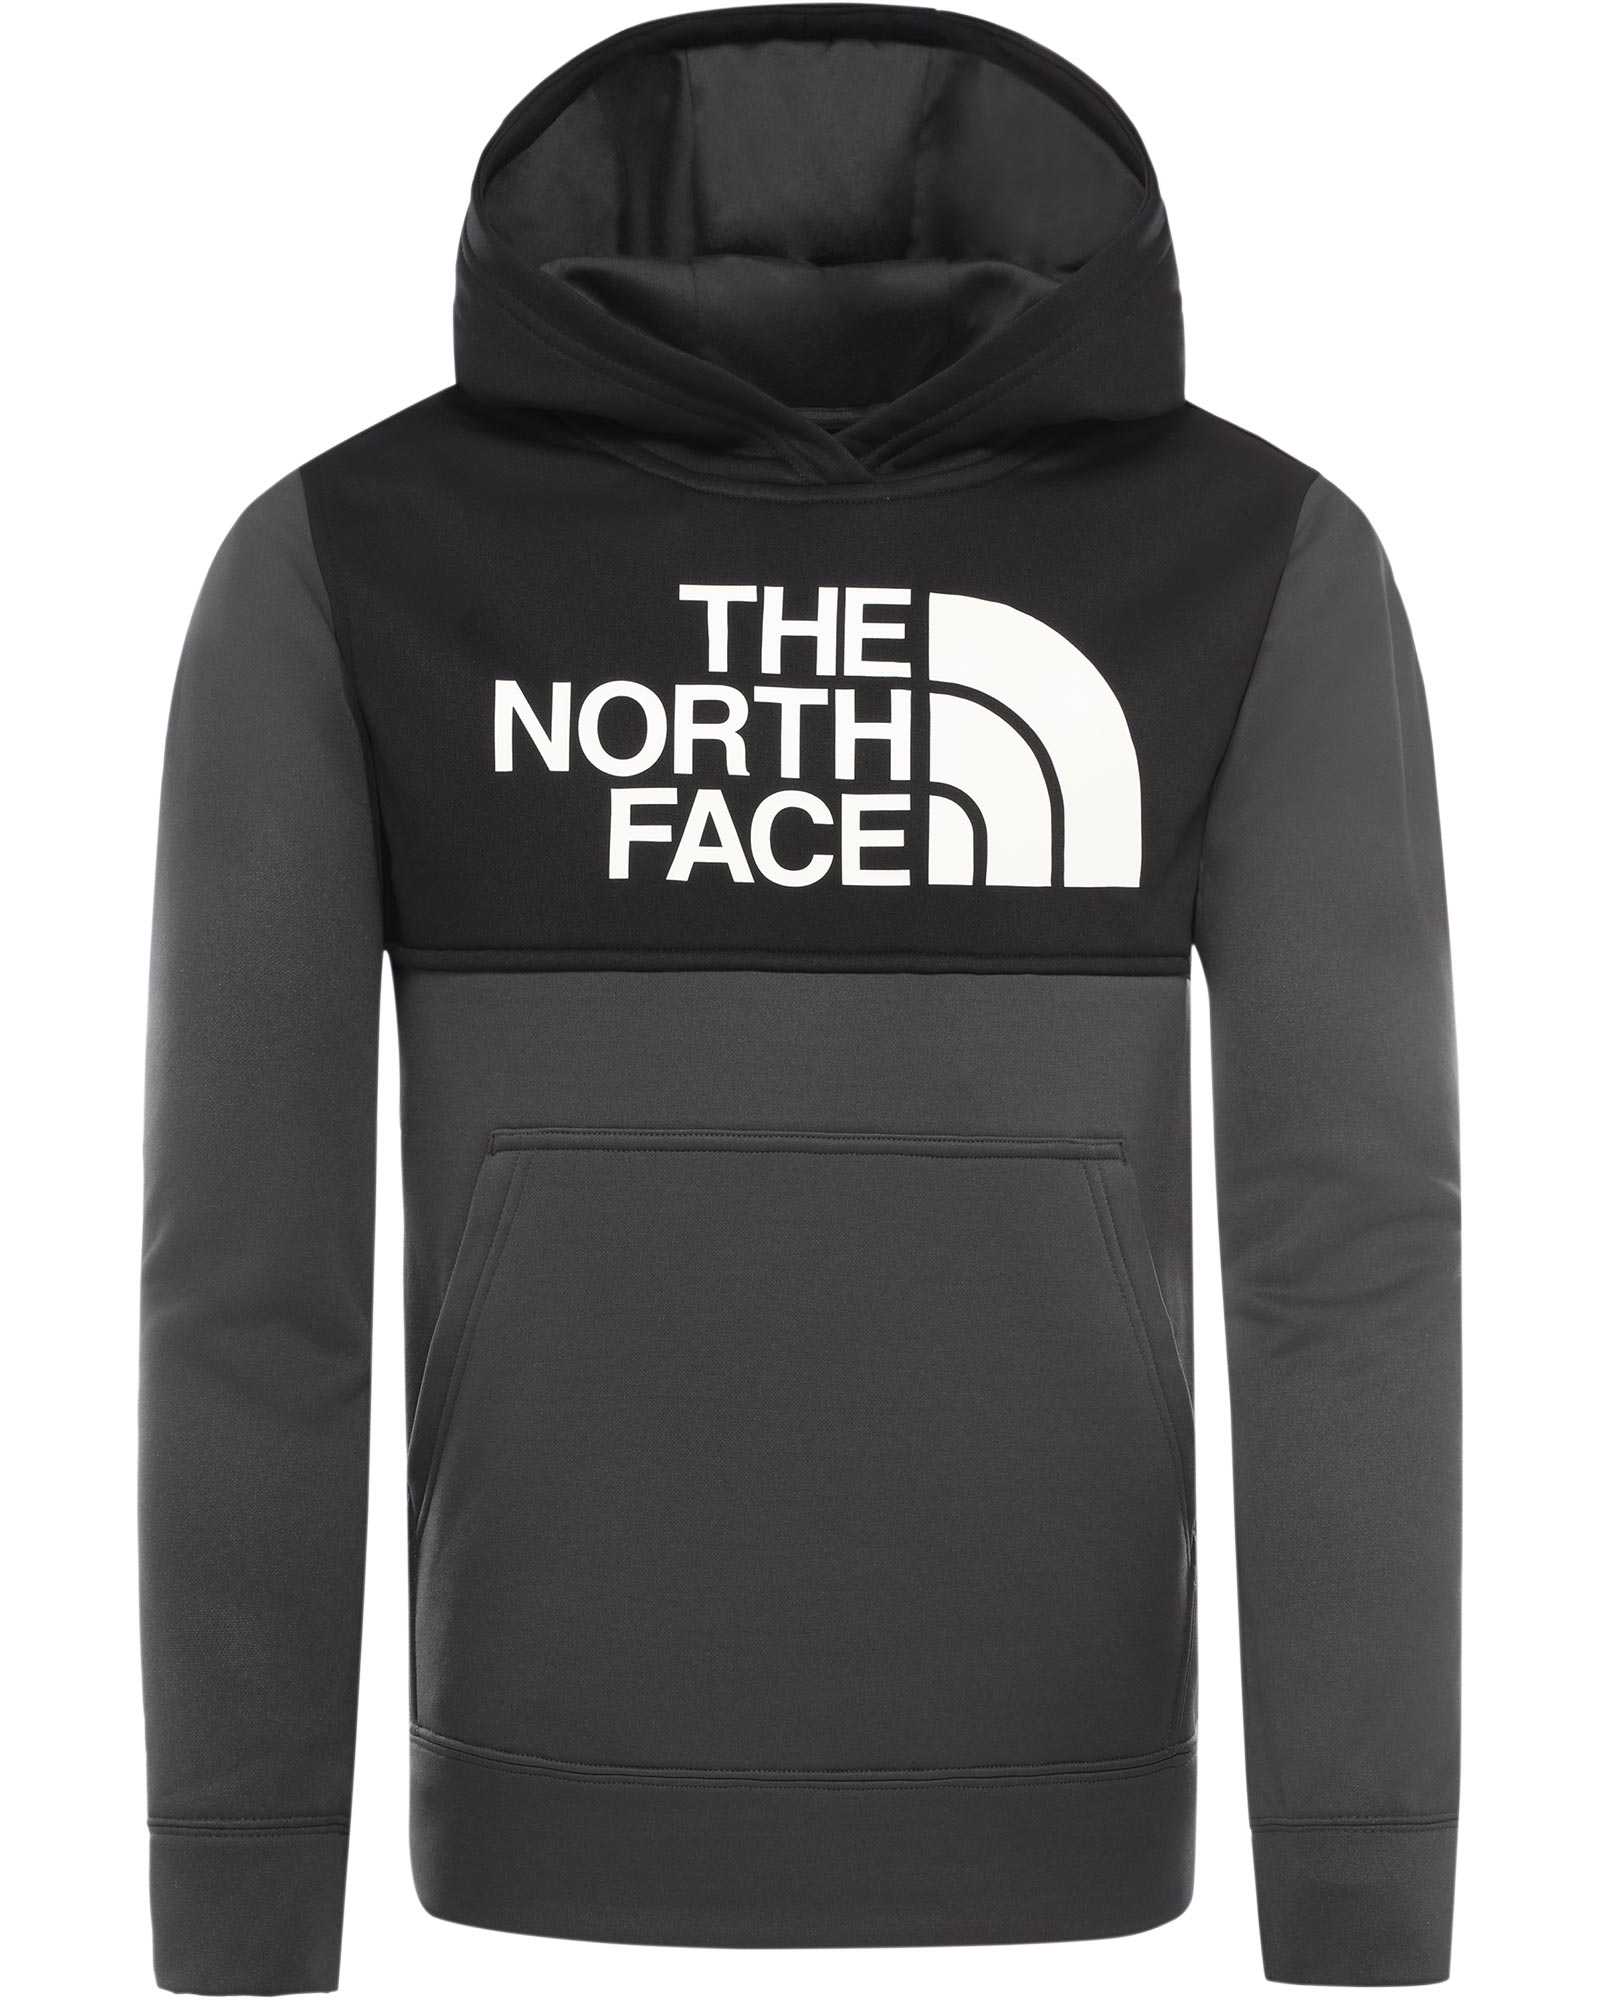 The North Face Surgent Pullover Block Boys Hoodie